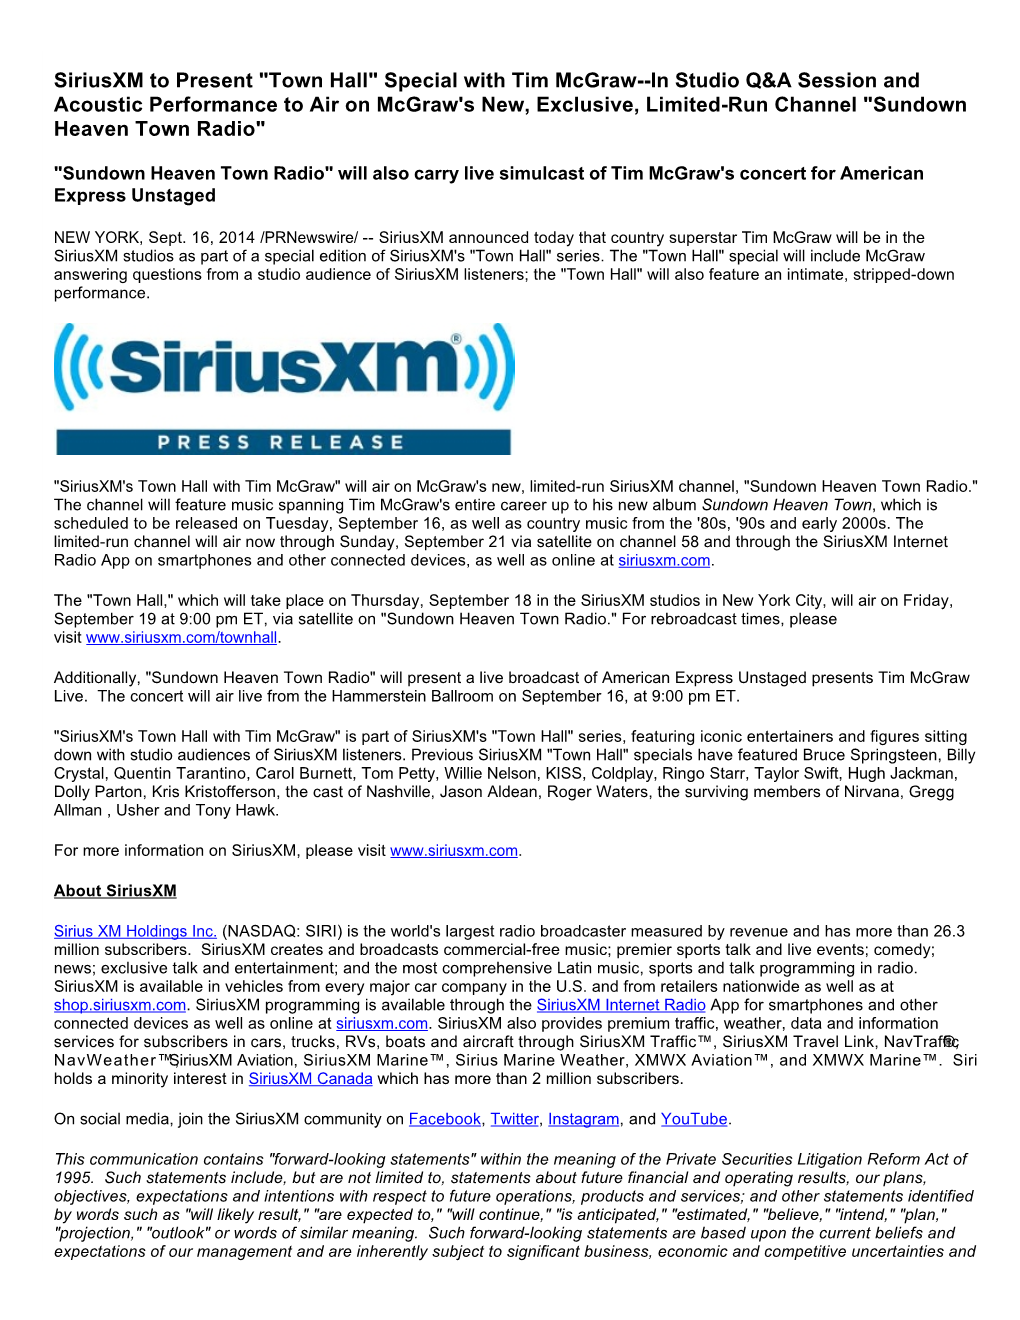 Siriusxm to Present "Town Hall" Special with Tim Mcgraw--In Studio